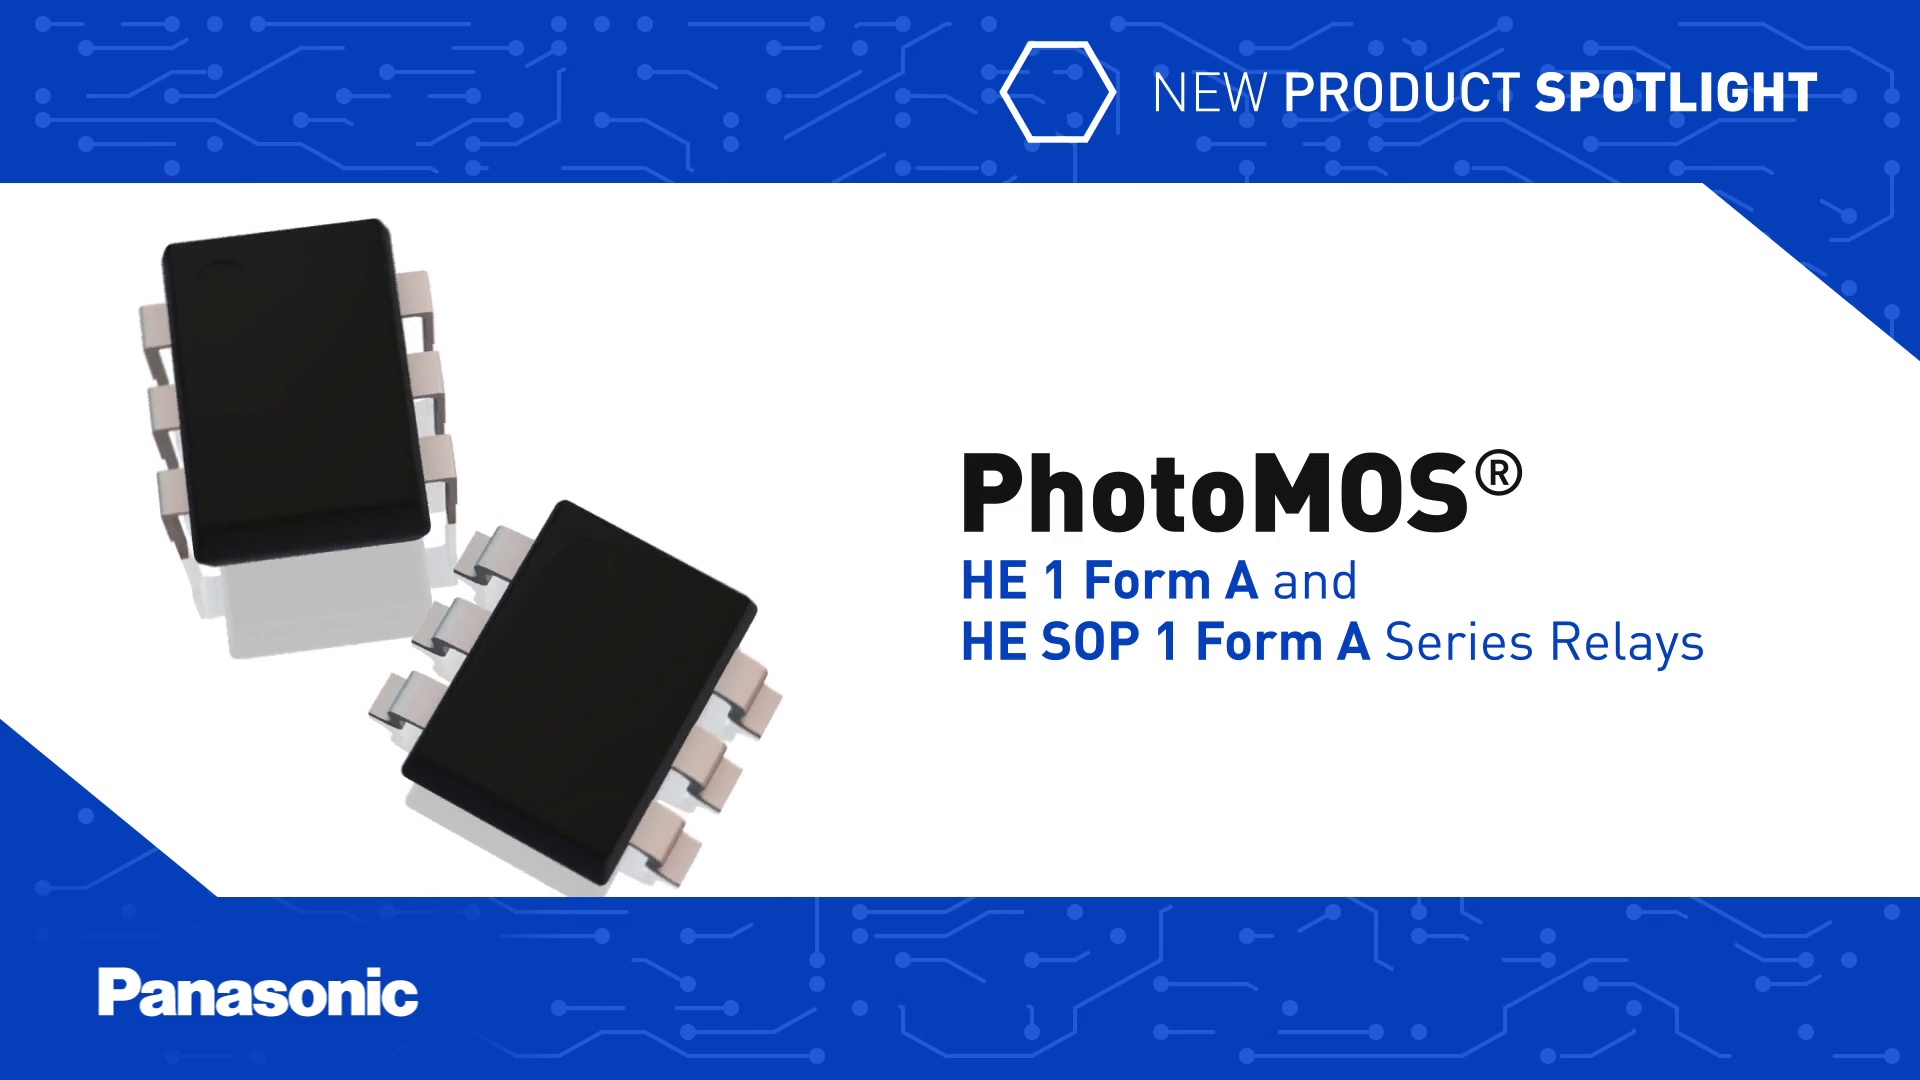 New Product Spotlight: PhotoMOS HE 1 Form A and HE SOP 1 Form A Series  Relays